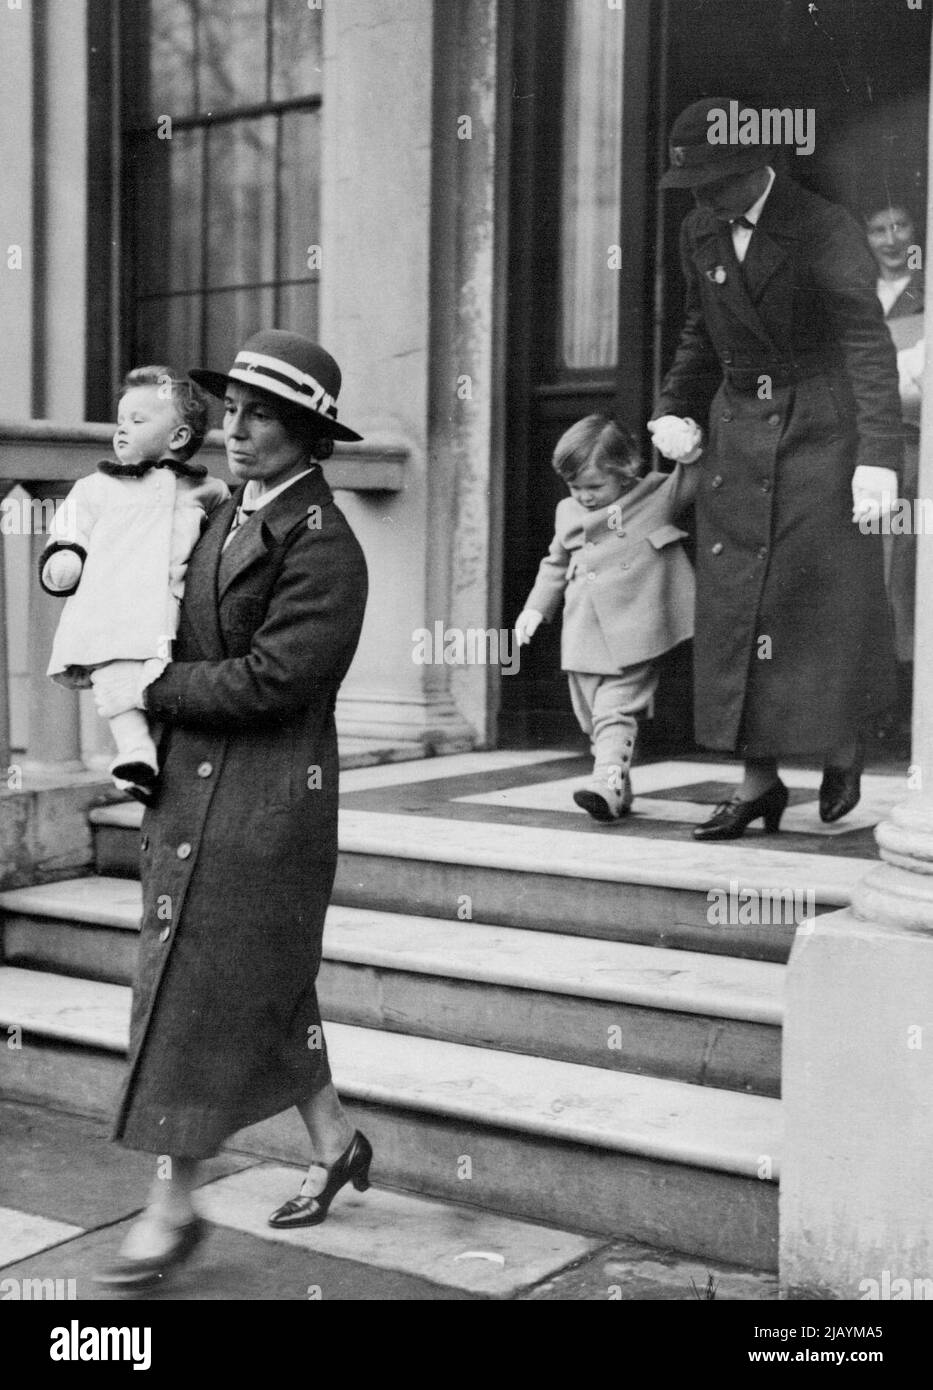 Royal Children Leave for Xmas Holiday -- Princess Alexandra and her brother, Prince Edward, leaving Belgrave Square for Sandringham, where they will spend the Christmas with the King and Queen and other members of the Royal Family. January 10, 1938. (Photo by Central Press Photos Ltd.) Stock Photo